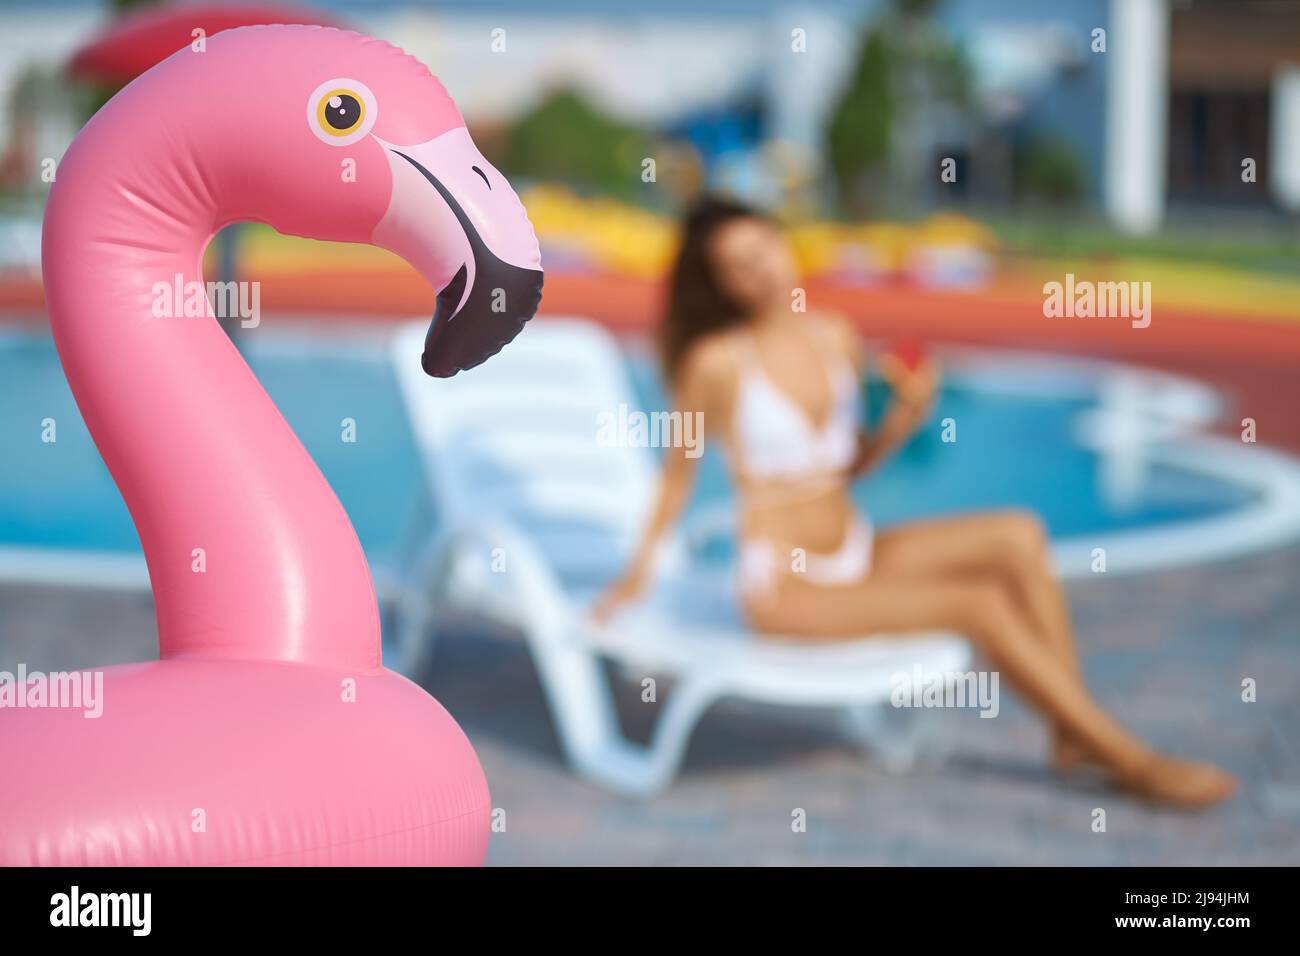 Inflatable pink flamingo ring at swimming pool area outside. Close up view of pink flamingo air mattress with blurred female figure sitting on lounge chair on background. Concept of water activities. Stock Photo